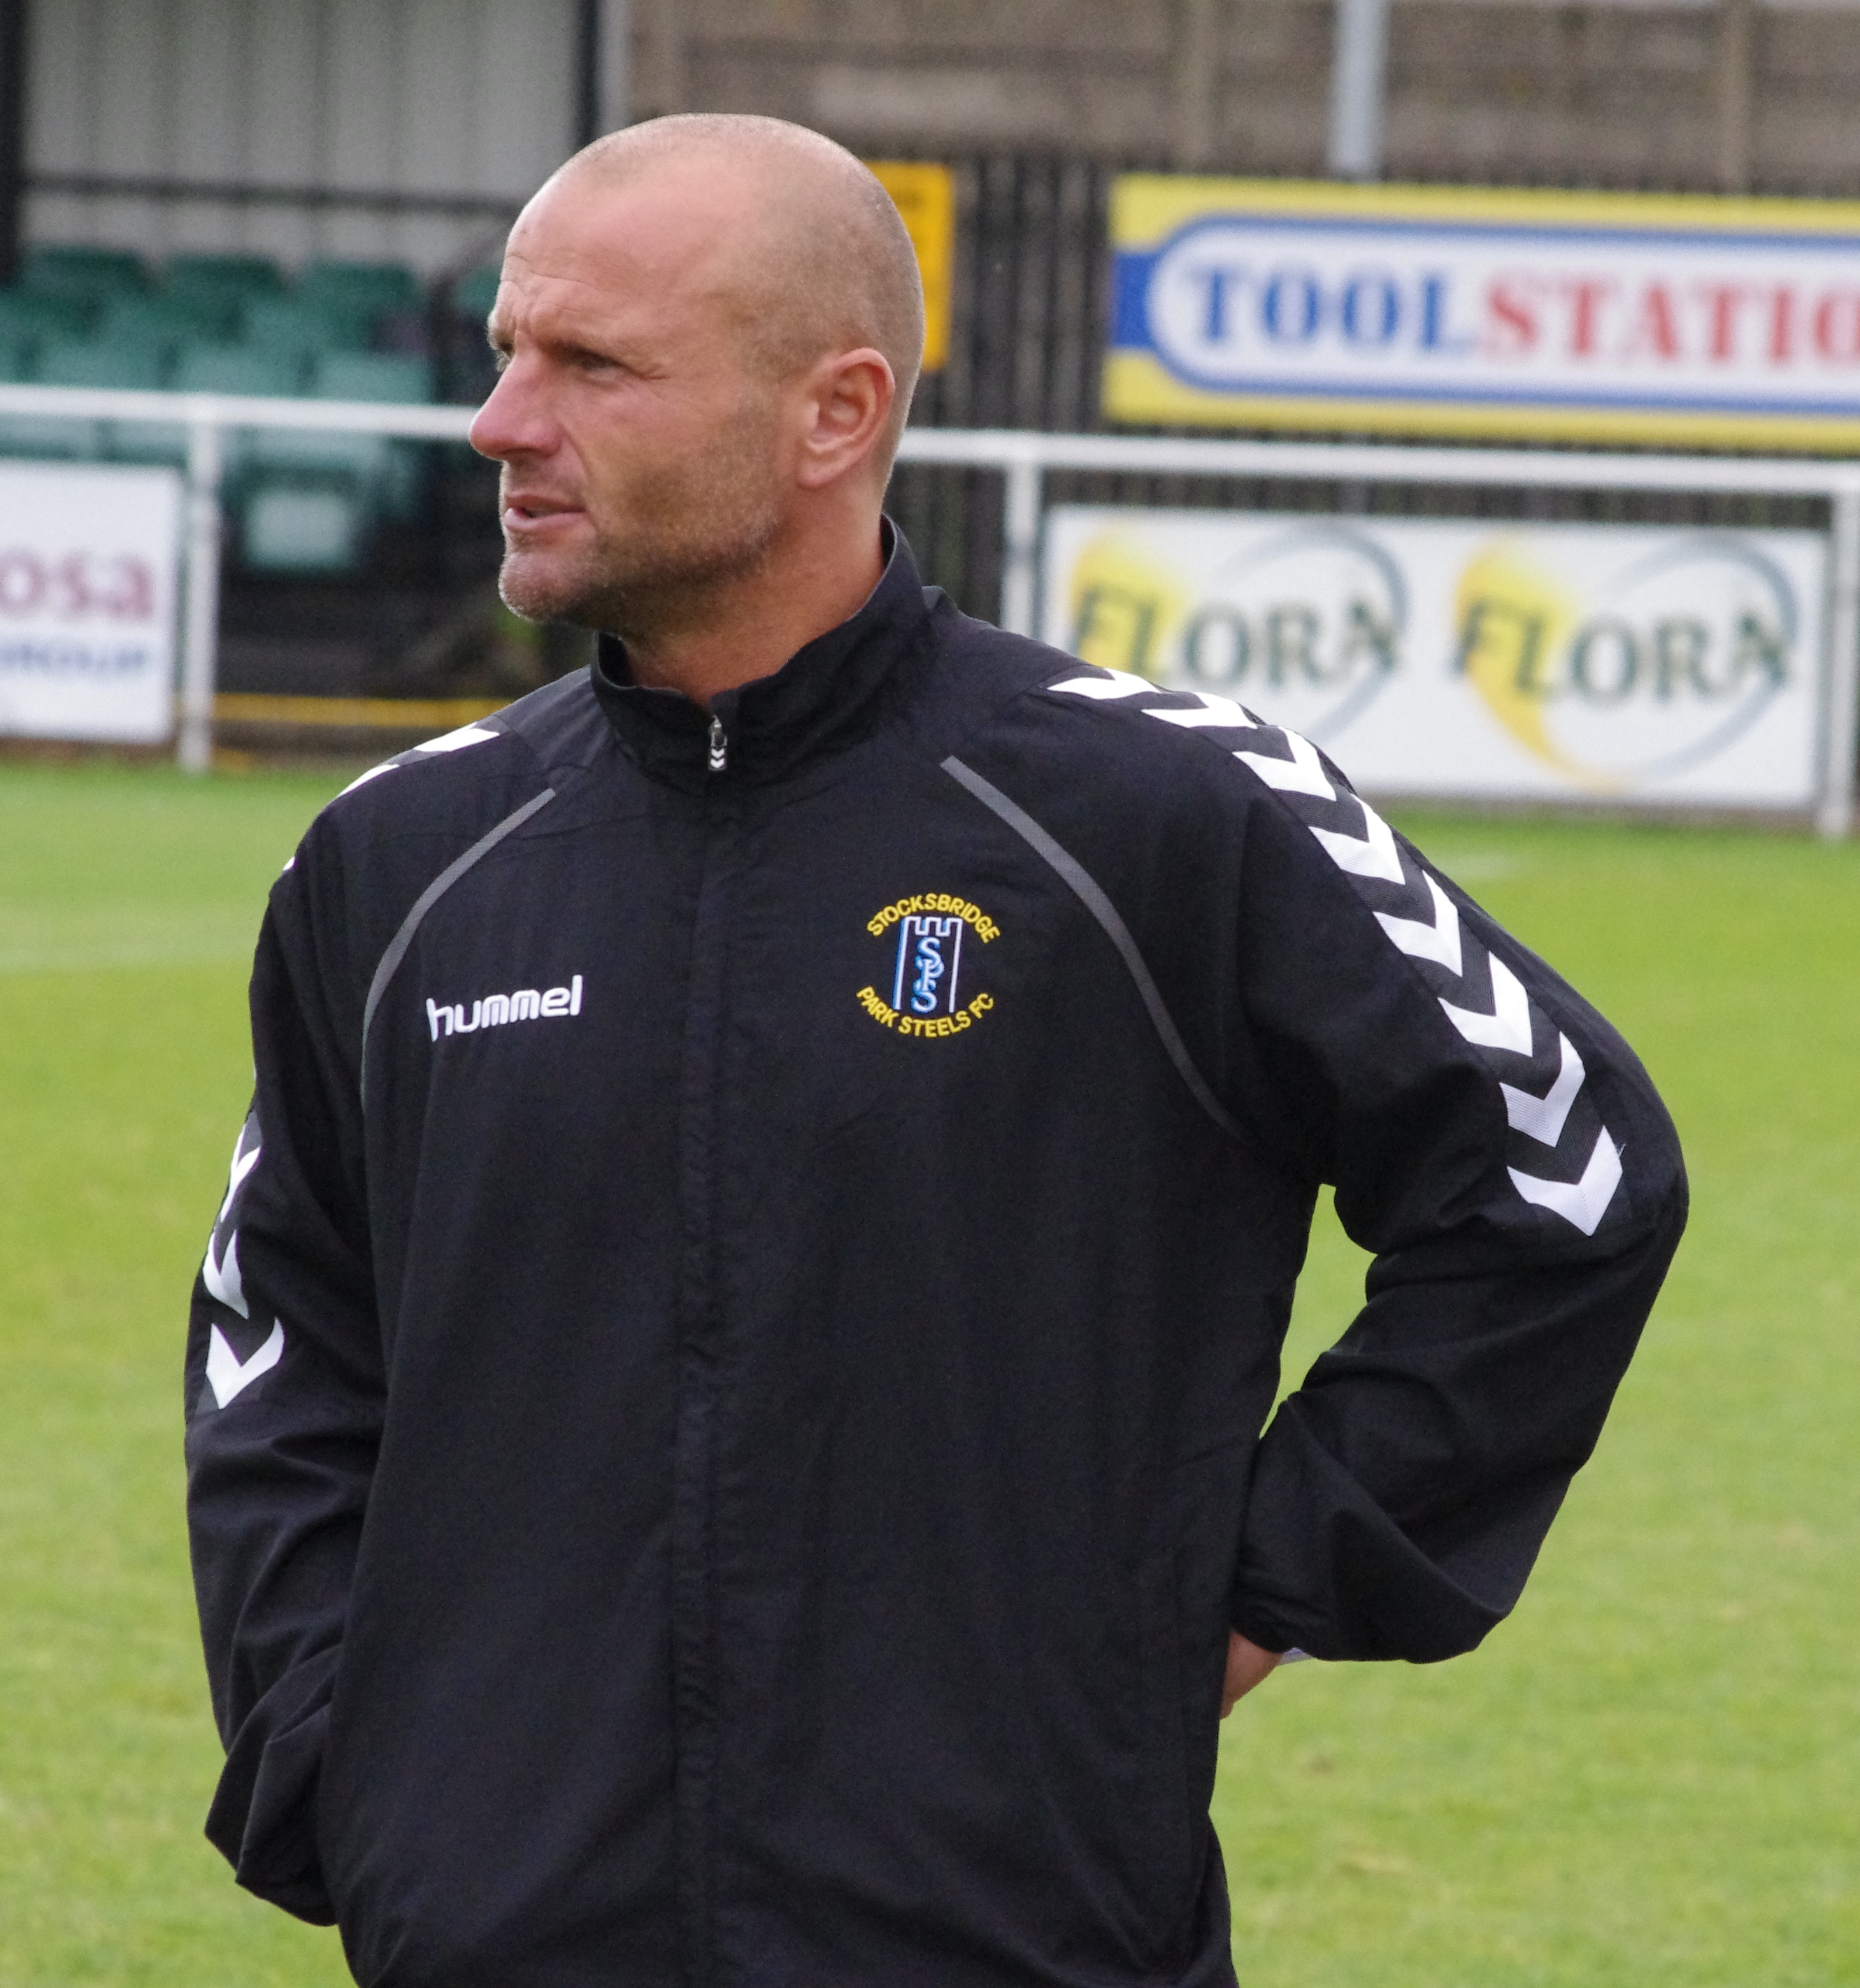 Mark Wilson stood on the side-lines at Handsworth during Stocksbridge's recent 3-0 defeat